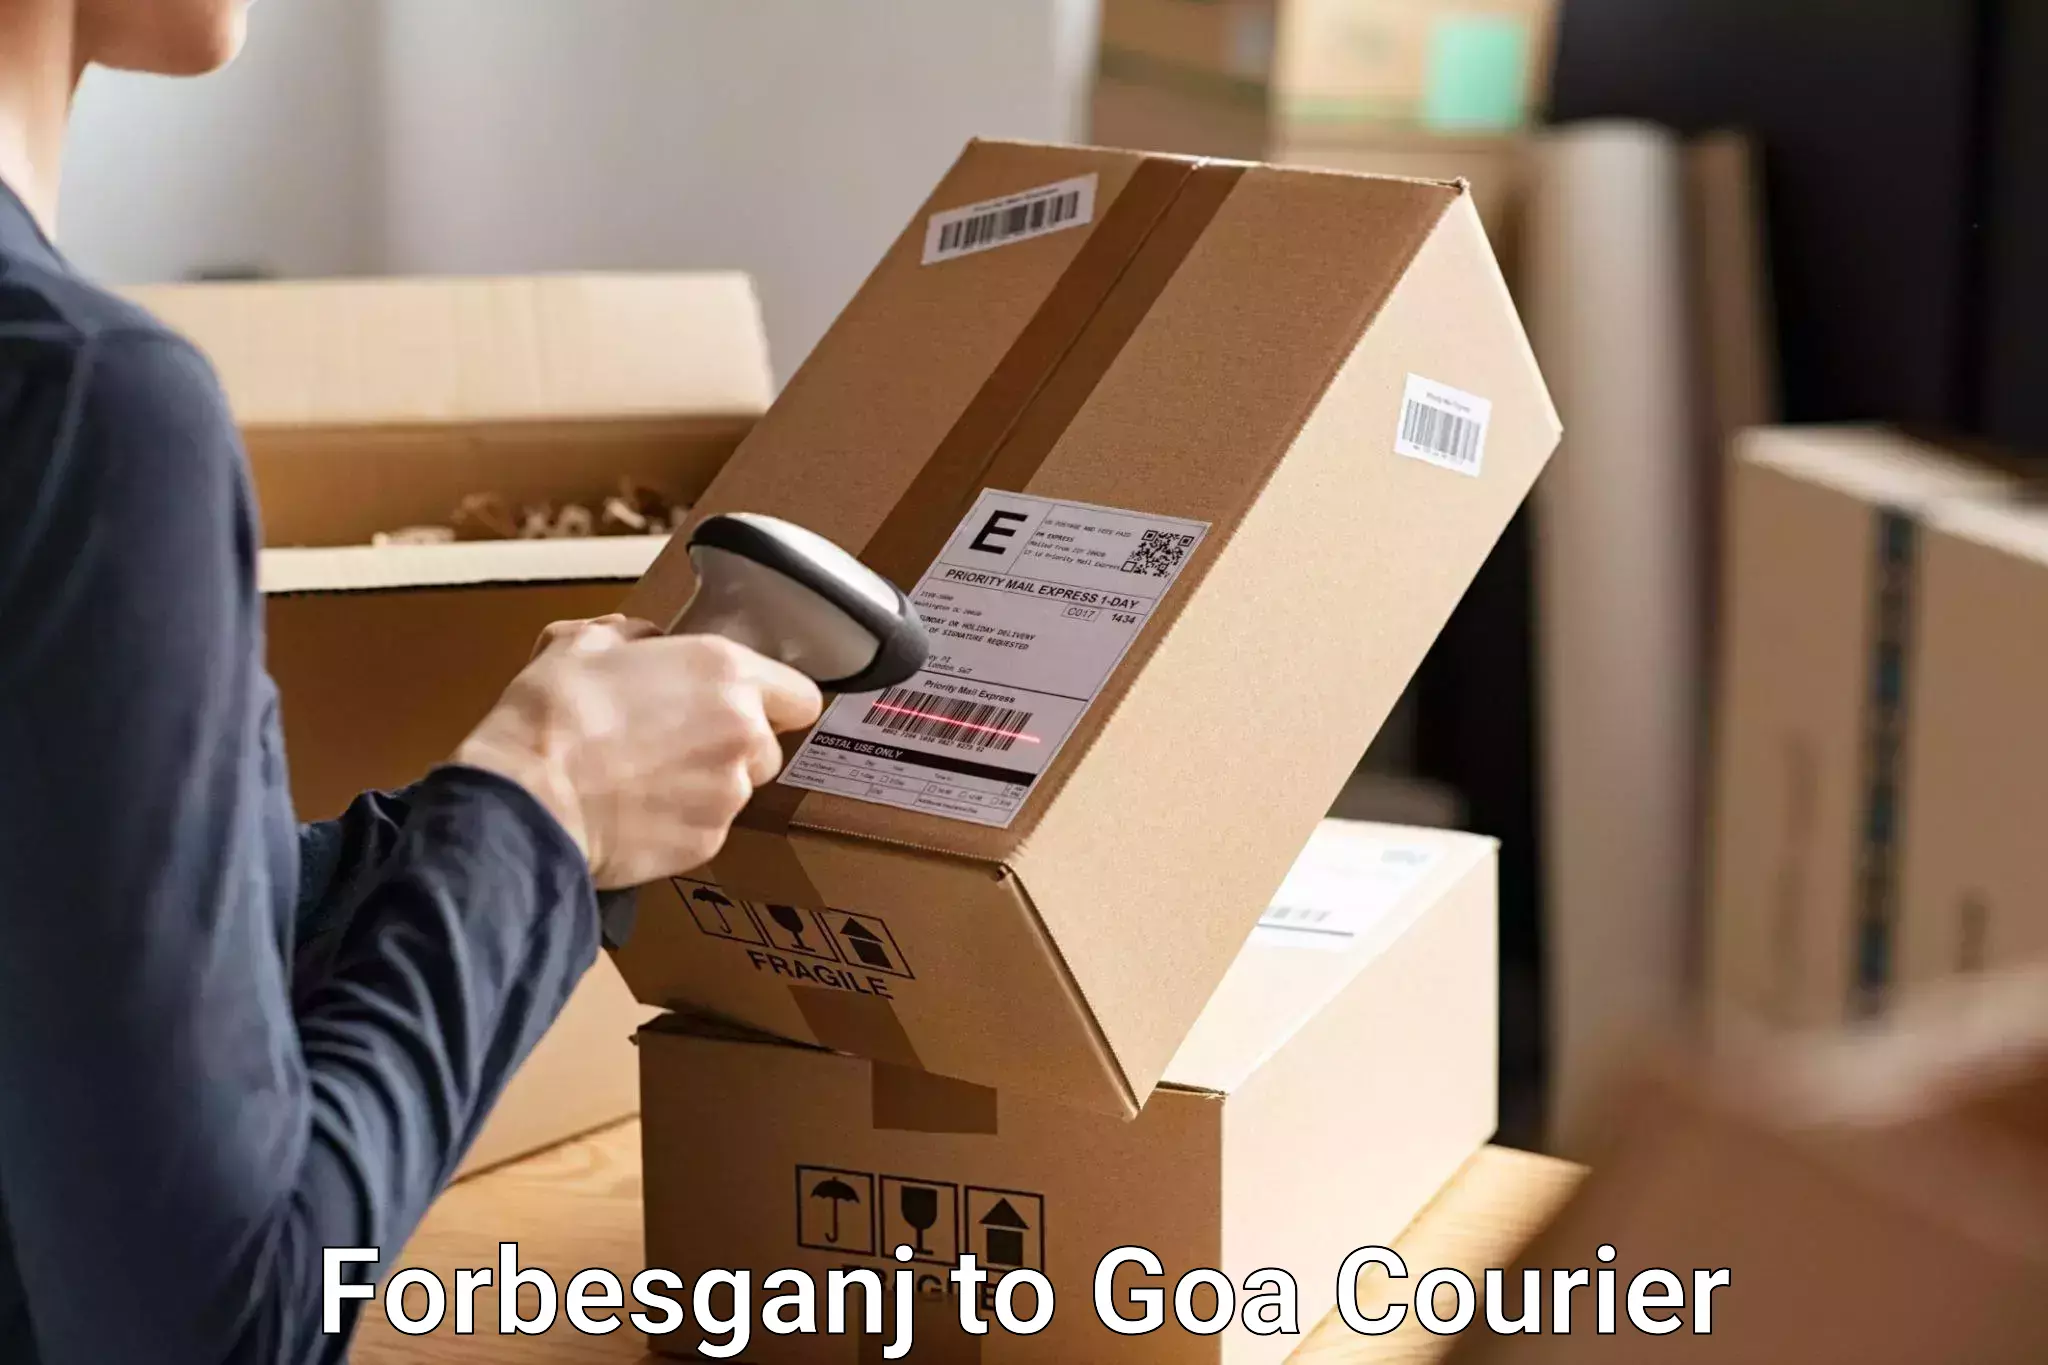 Luggage delivery system Forbesganj to Panjim